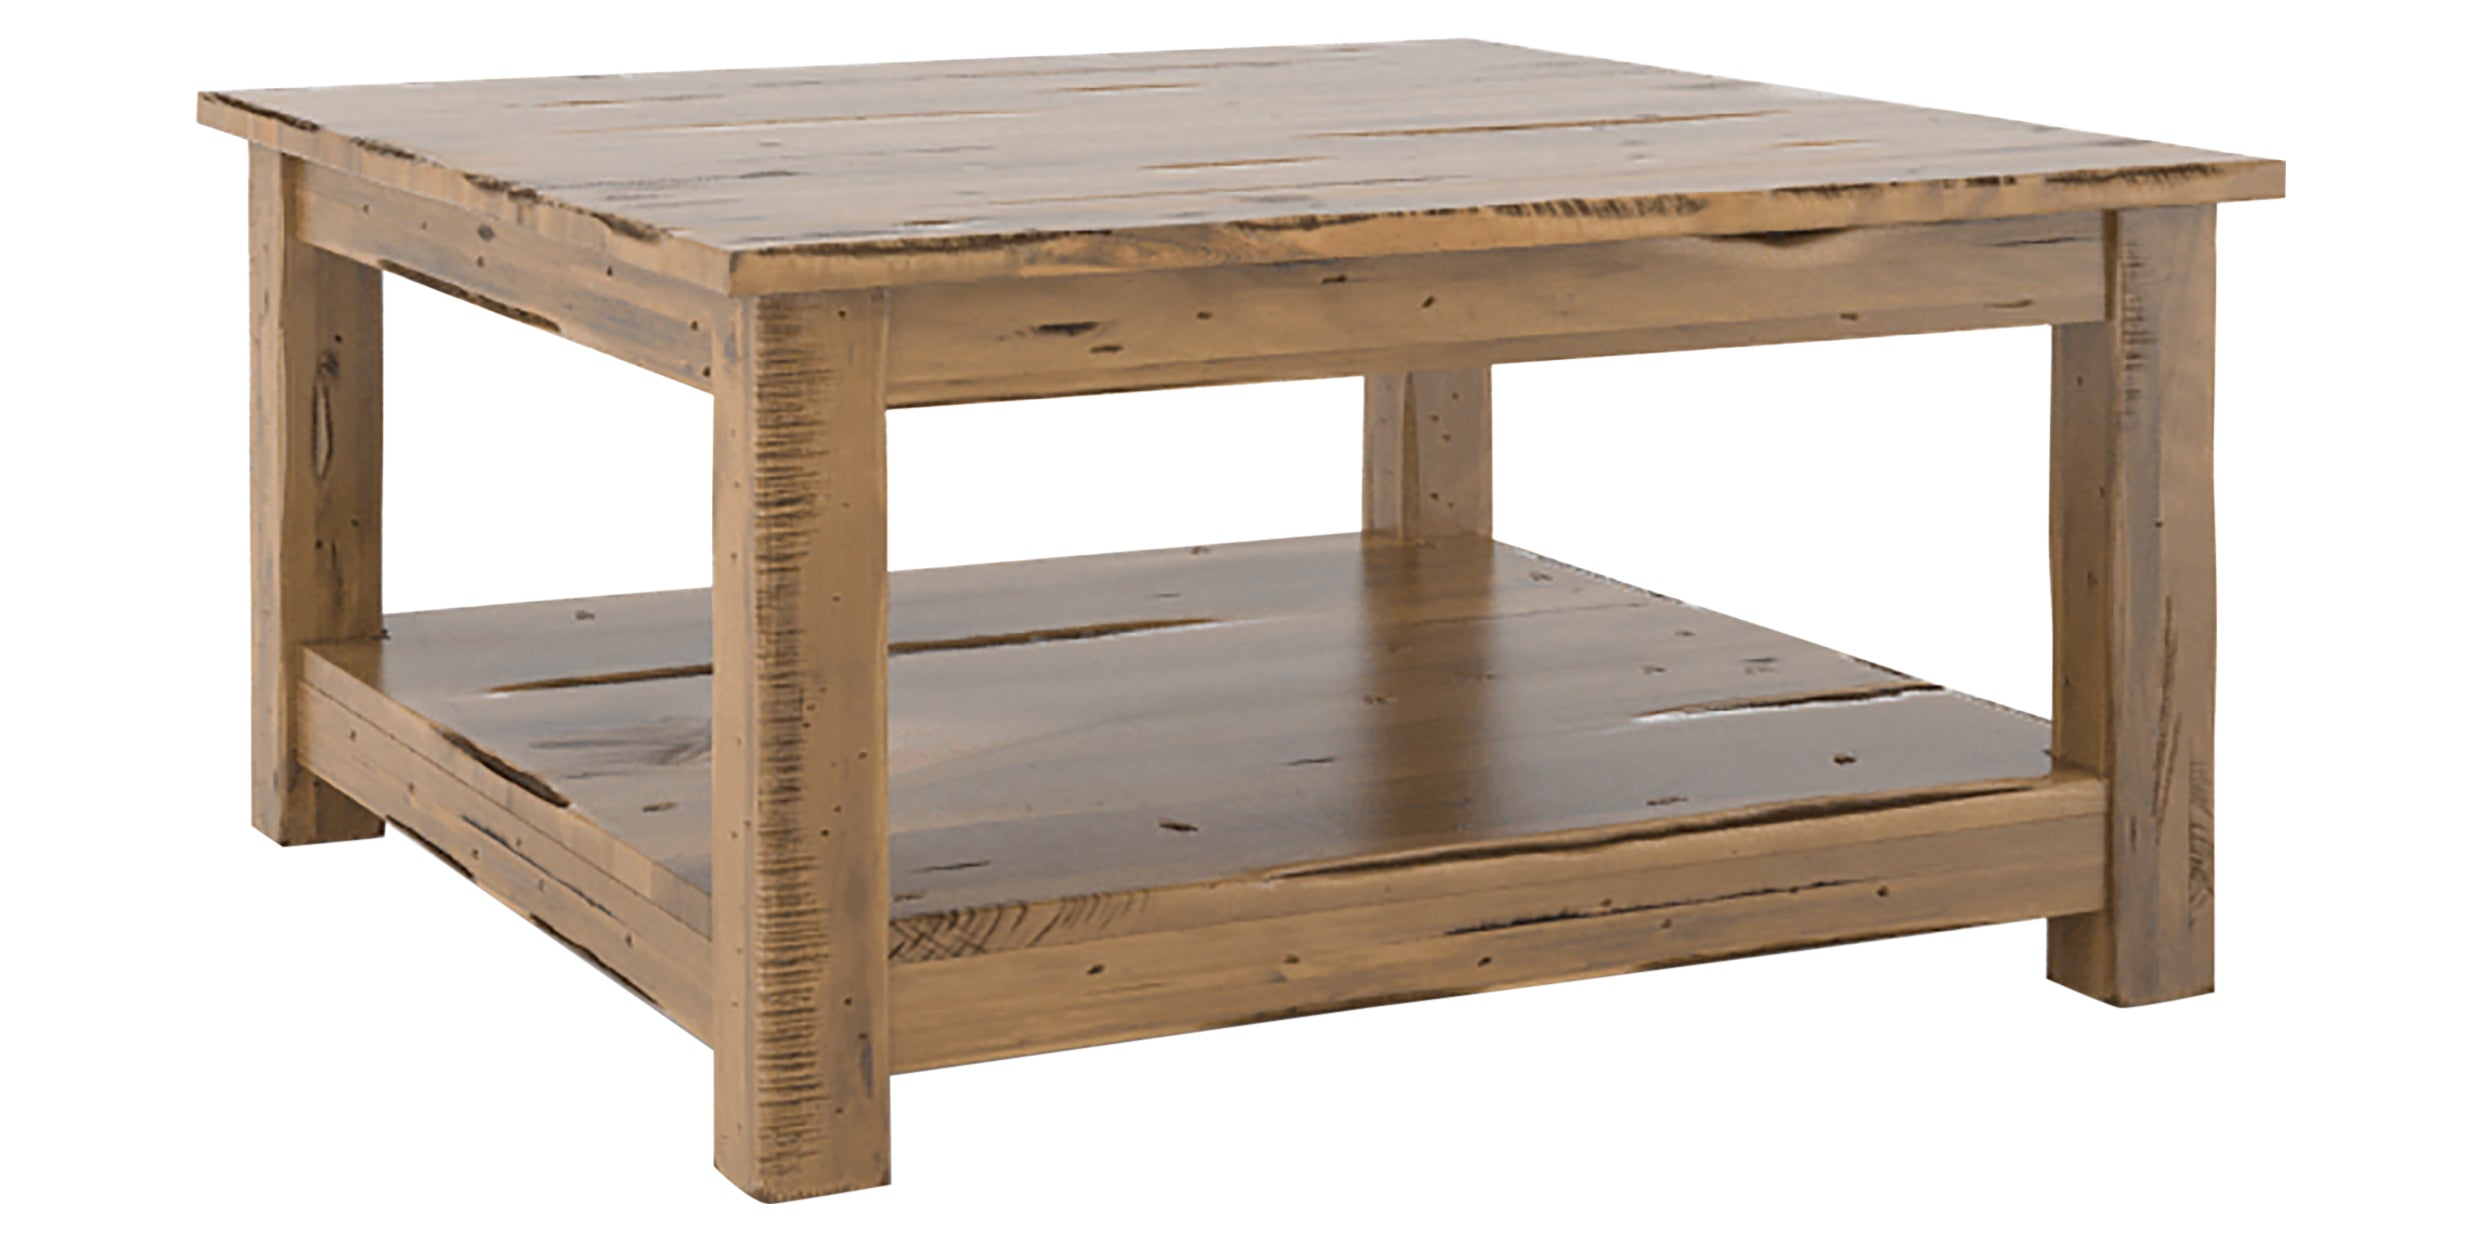 Oak Washed with HJ Legs | Canadel Champlain Coffee Table 3636 | Valley Ridge Furniture